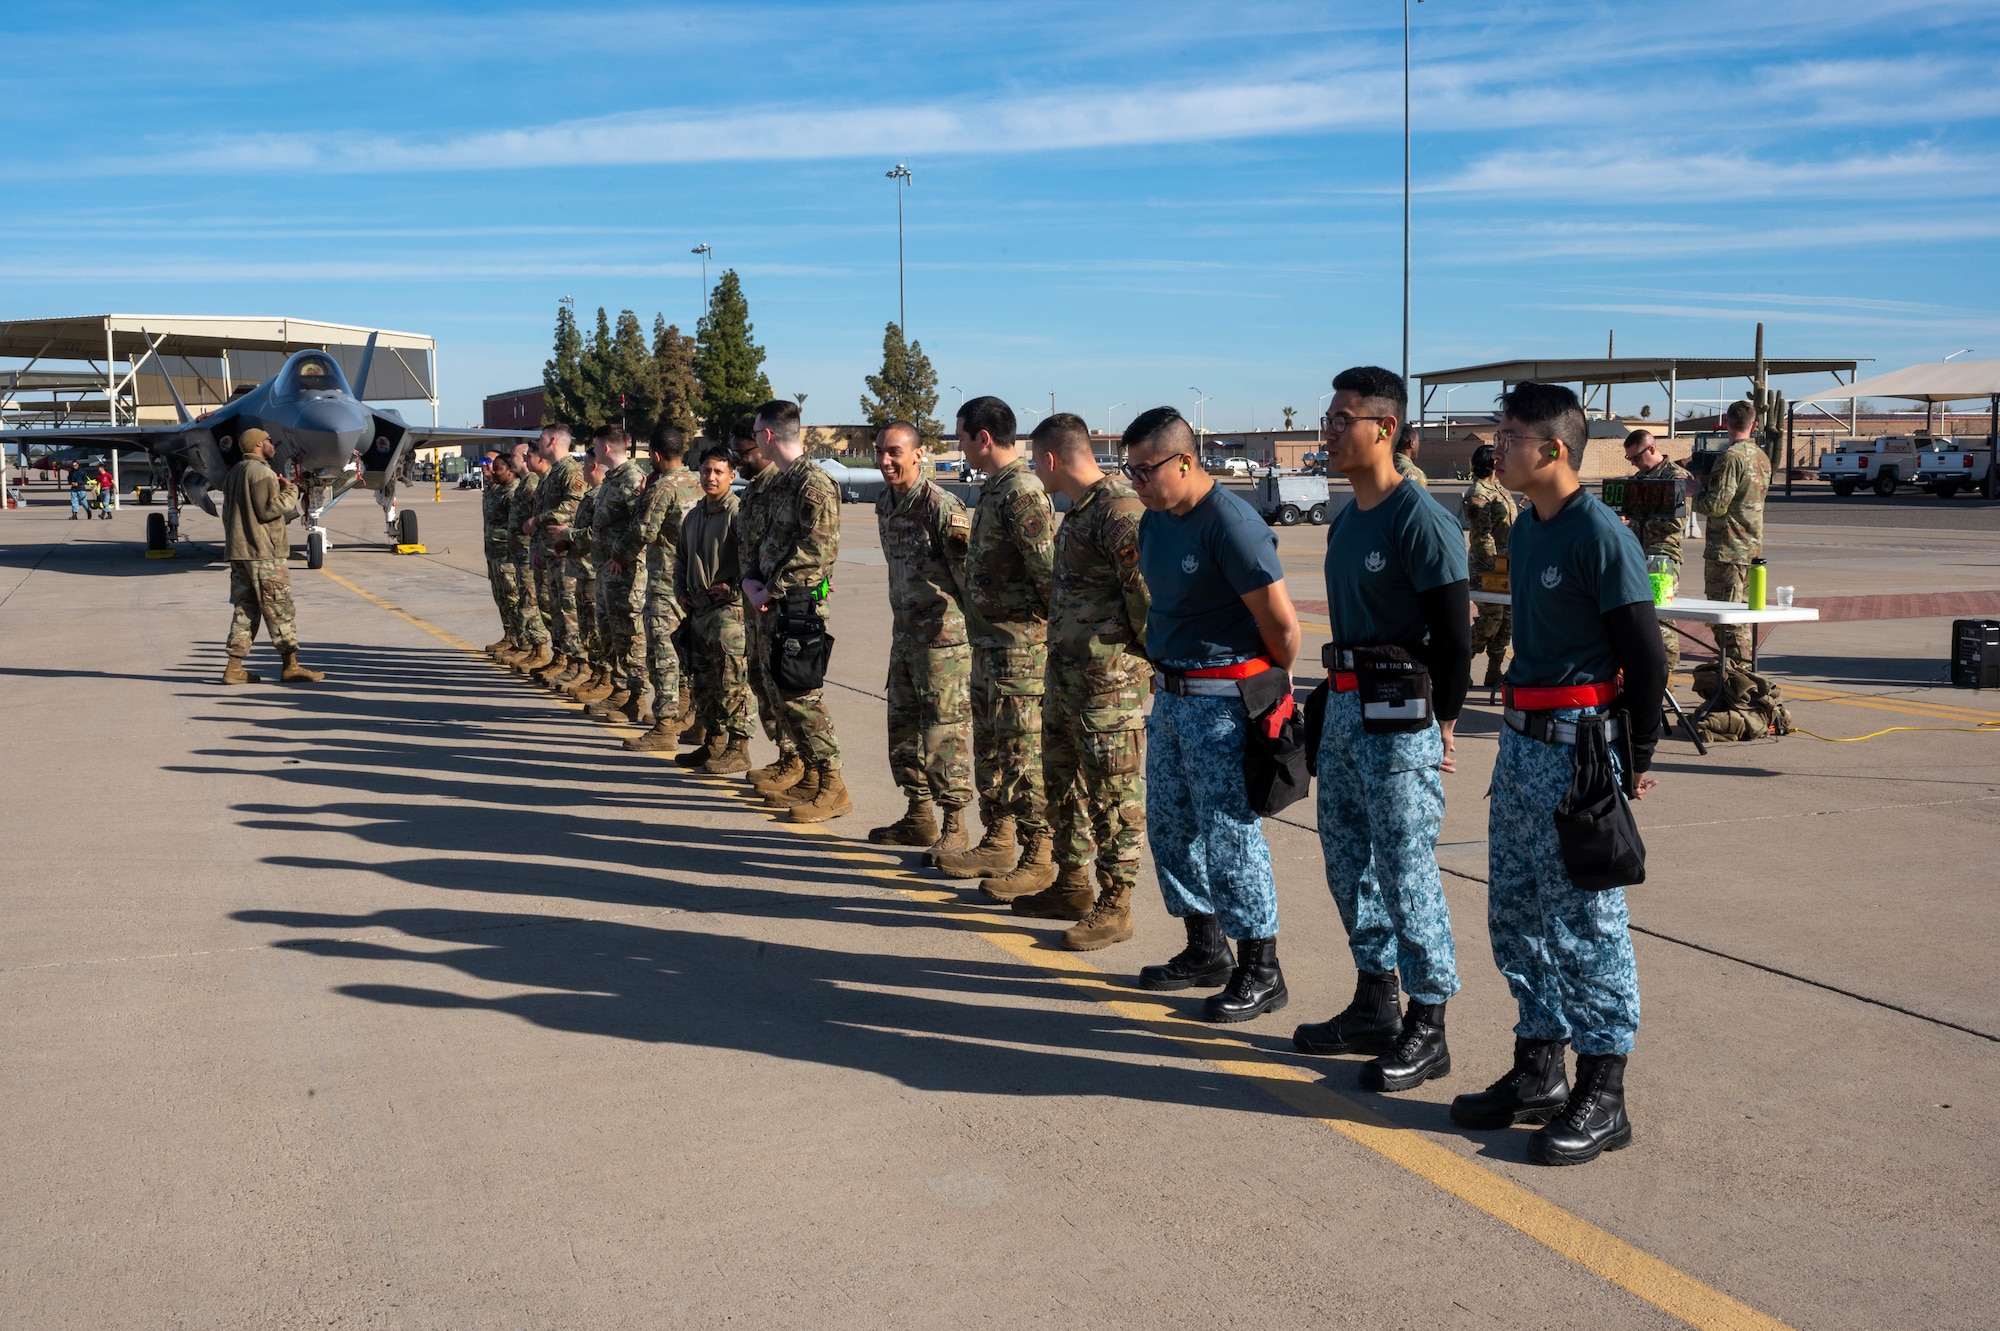 Airmen assigned to the 56th Maintenance Group and Singaporean service members prepare for the annual weapons load competition Feb. 3, 2023, at Luke Air Force Base, Arizona.